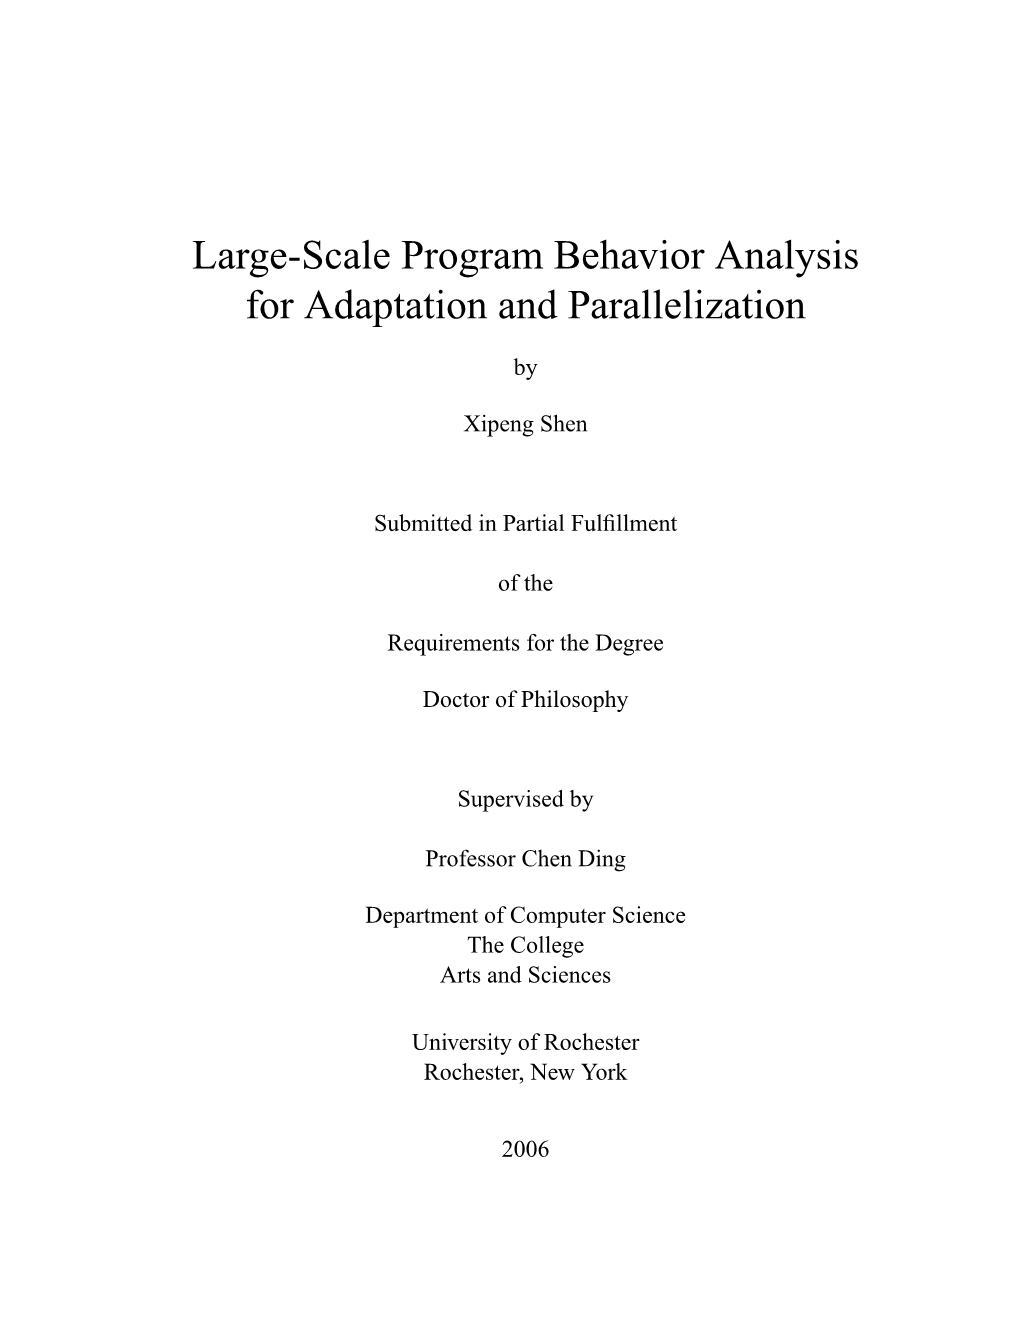 Large-Scale Program Behavior Analysis for Adaptation and Parallelization